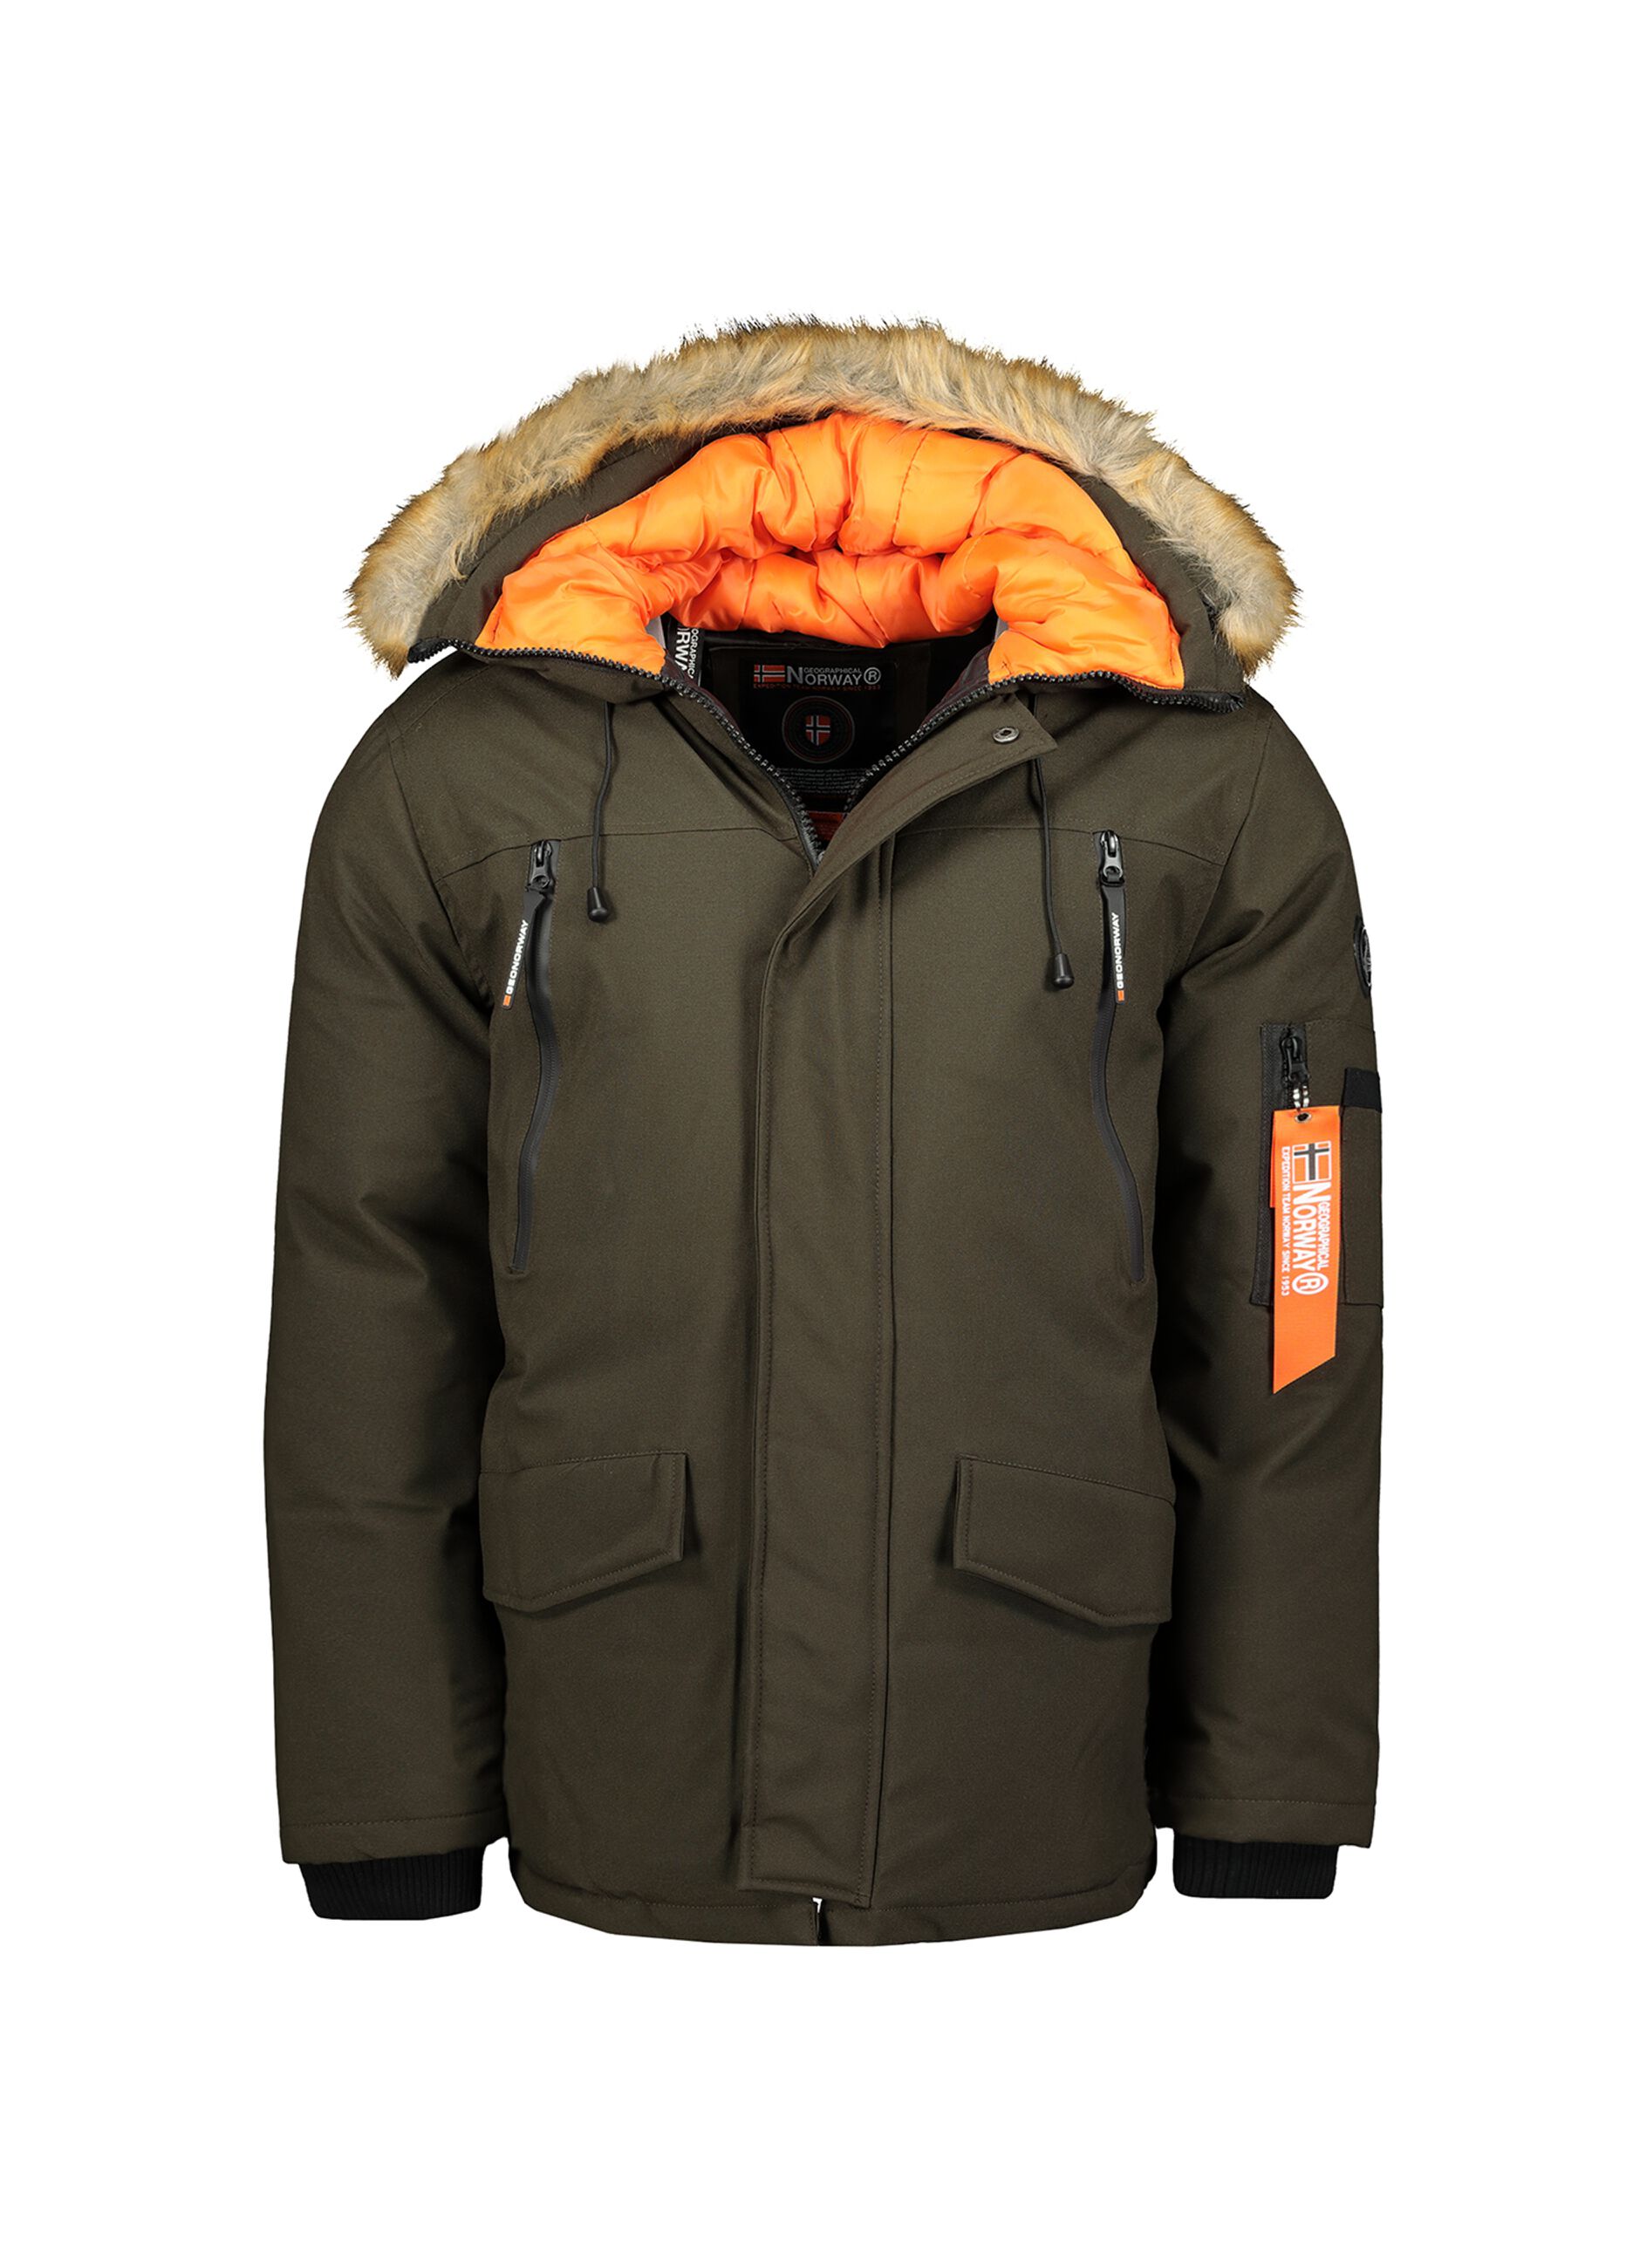 Geographical Norway short quilted parka